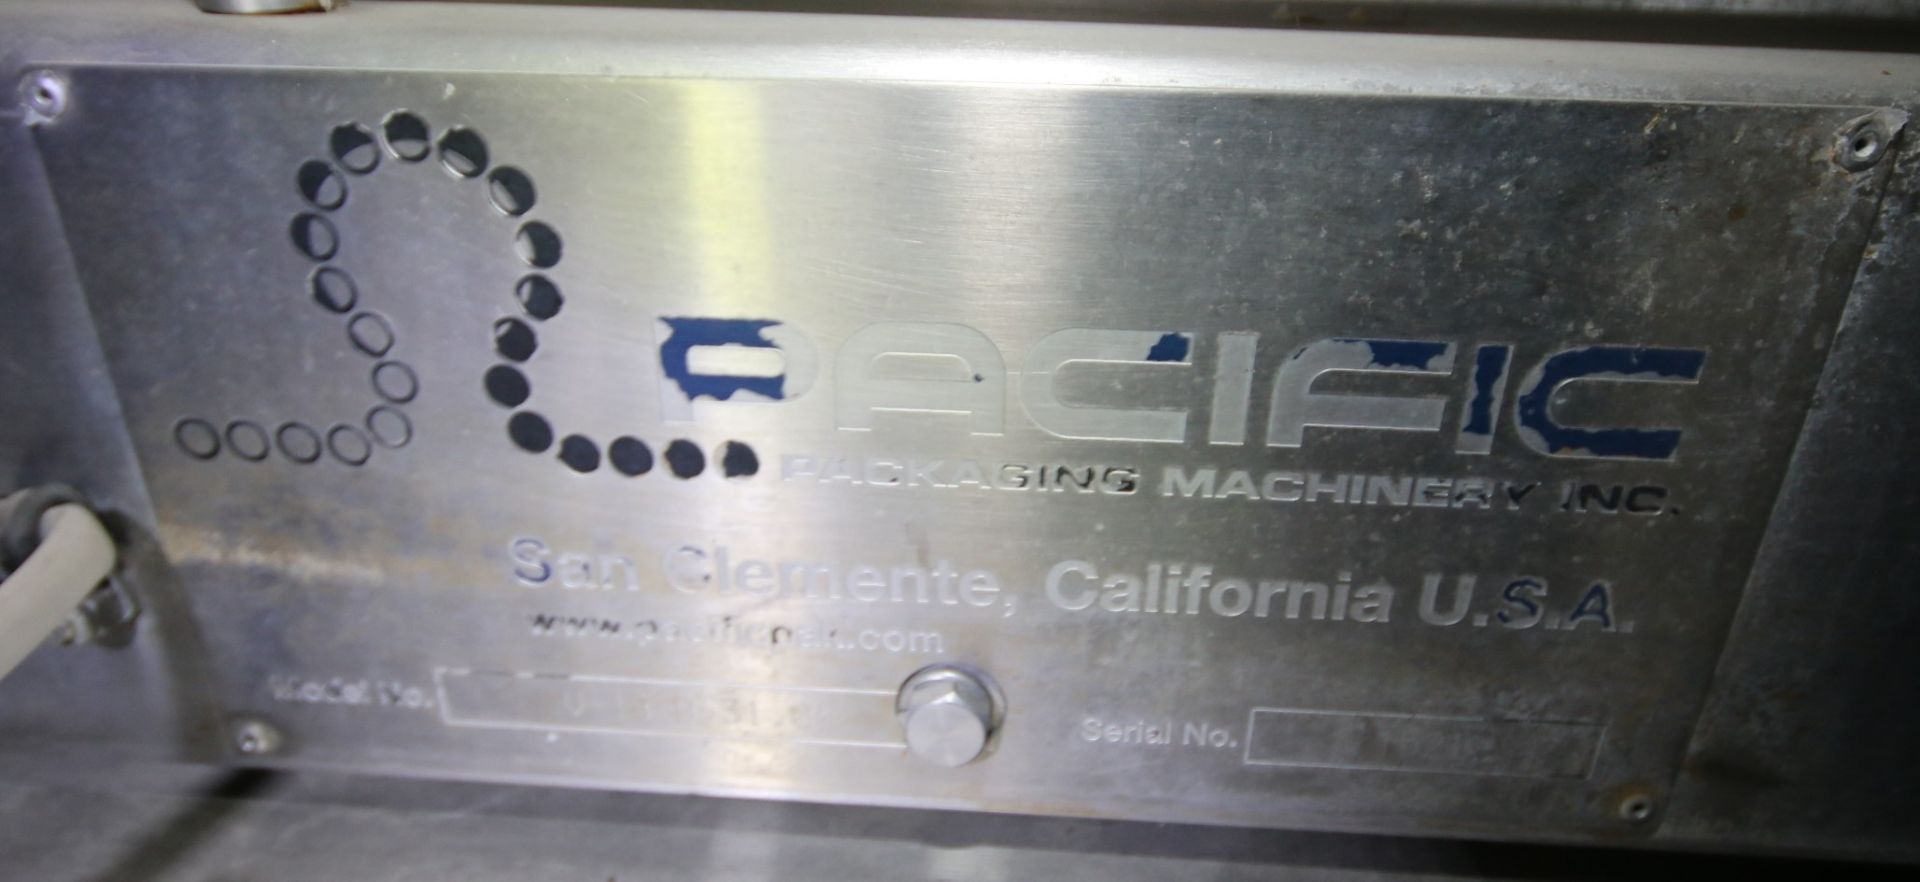 Pacific 18 – Valve Rotary Filler, Model V-18-B-31.000, S/N 1521 (Located in Anaheim, CA) - Image 19 of 19